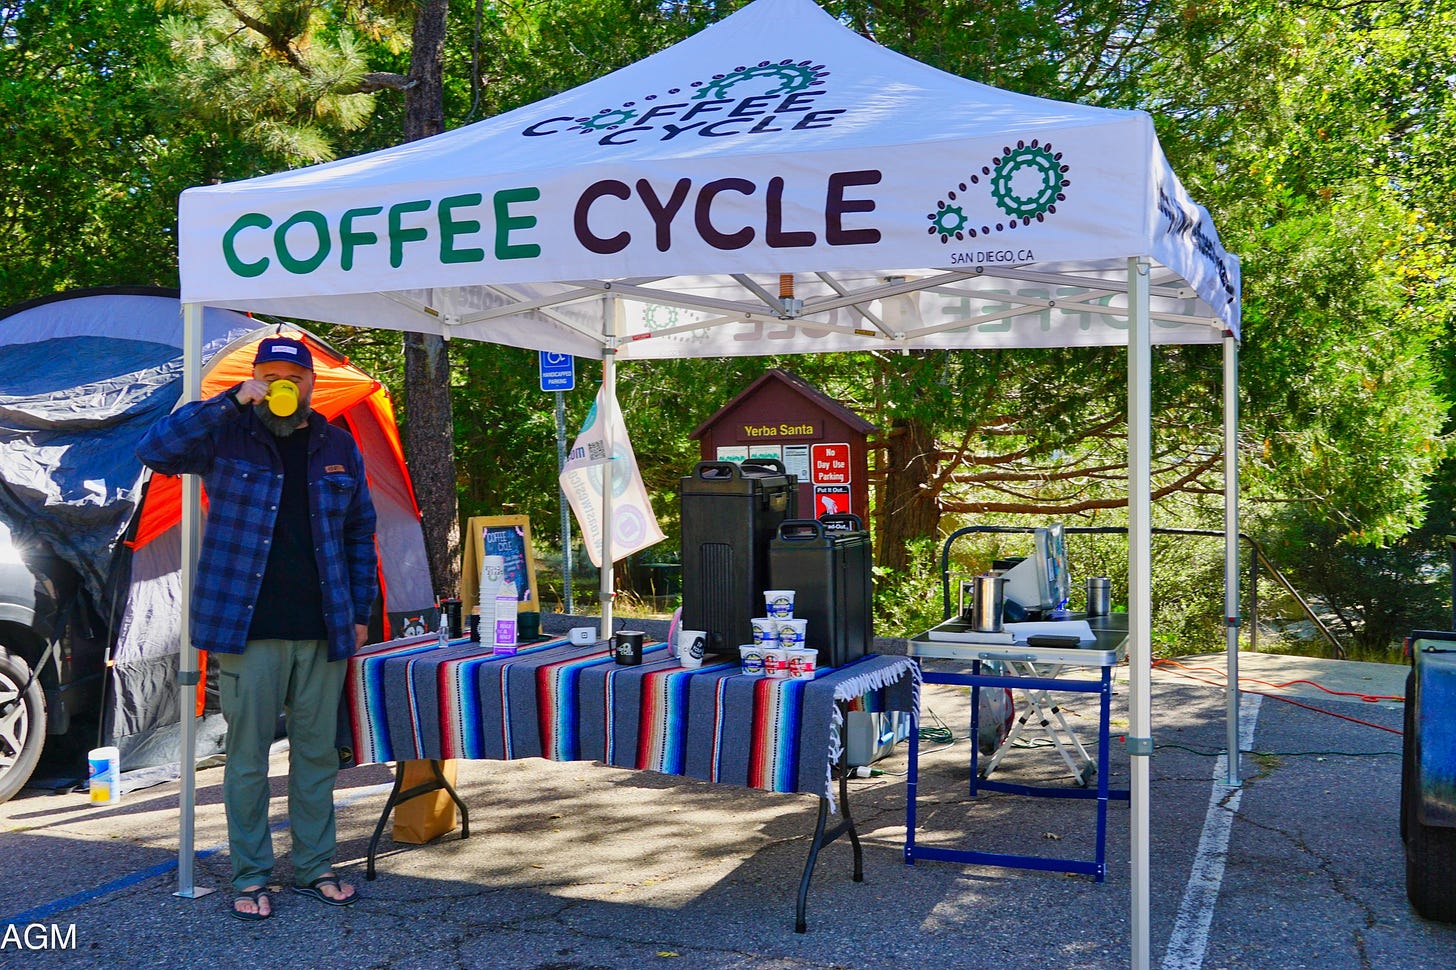 A bearded man drinks deeply from a yellow coffee mug while standing in front of a pop-up tent coffee shop in the parking lot of a campground. Pine trees fill the background and he's wearing a blue buffalo check coat, green hiking pants, and flip-flops.